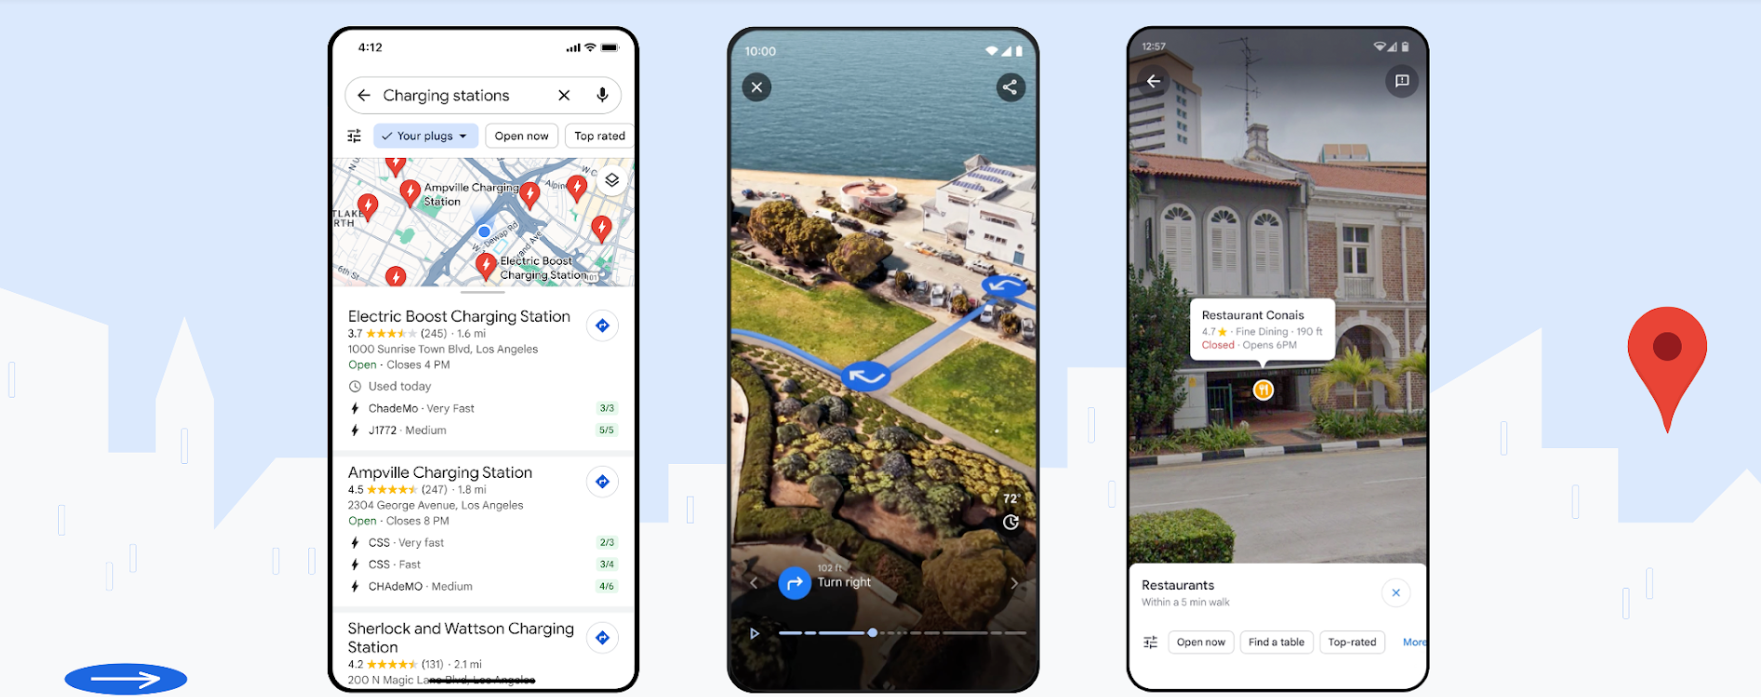 New Google Maps updates: Immersive View for routes and other AI features - techbuzzireland